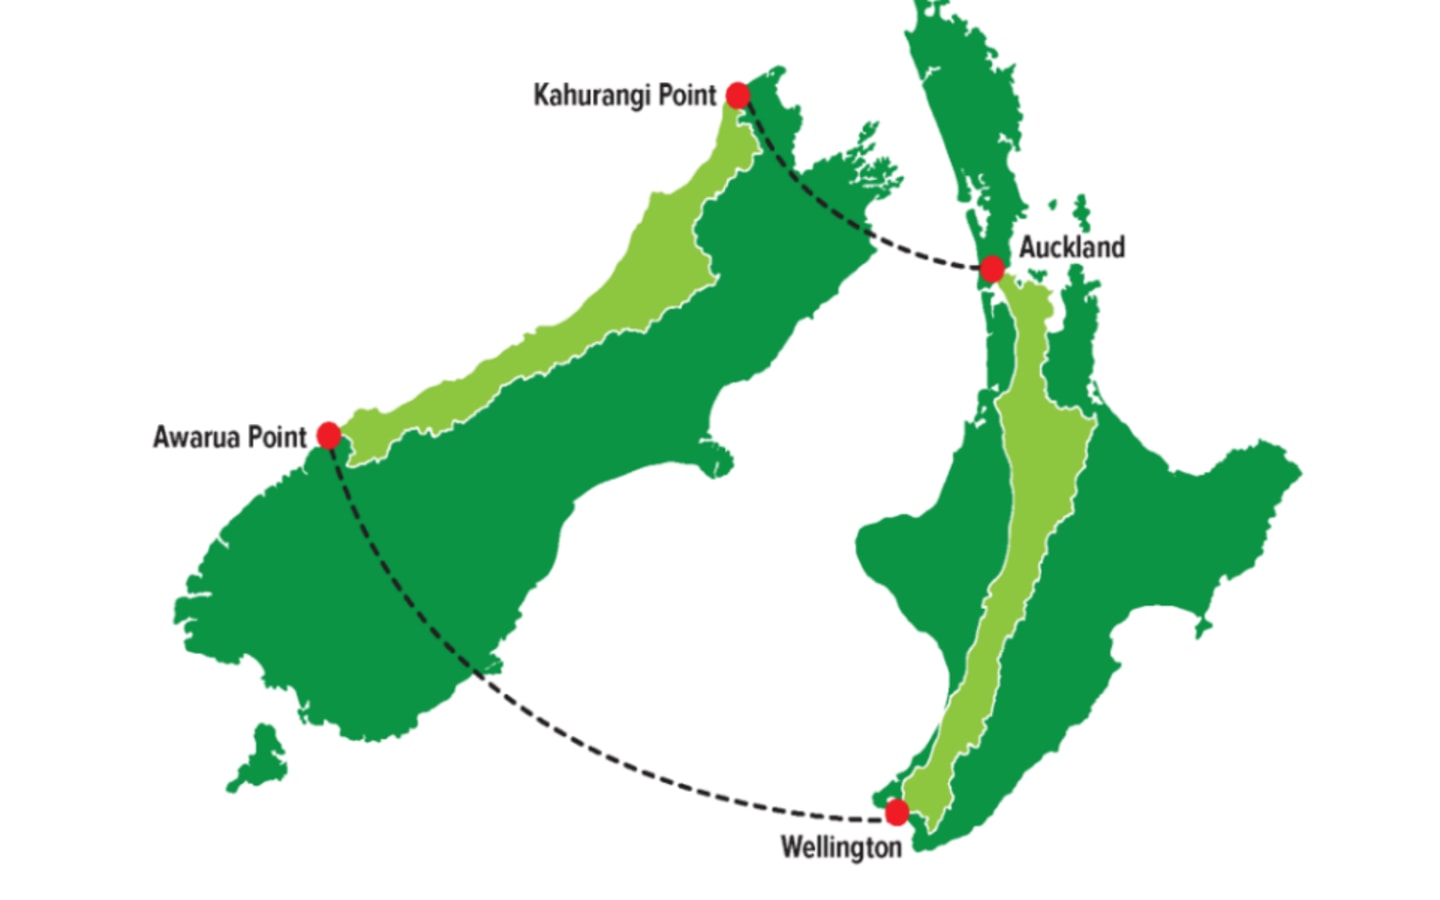 The Te Tai o Poutini Plan which covers a huge geographical area, is a blue print of the changes signalled by the Government under the RMA reforms of larger regional plans replacing individual district plans.